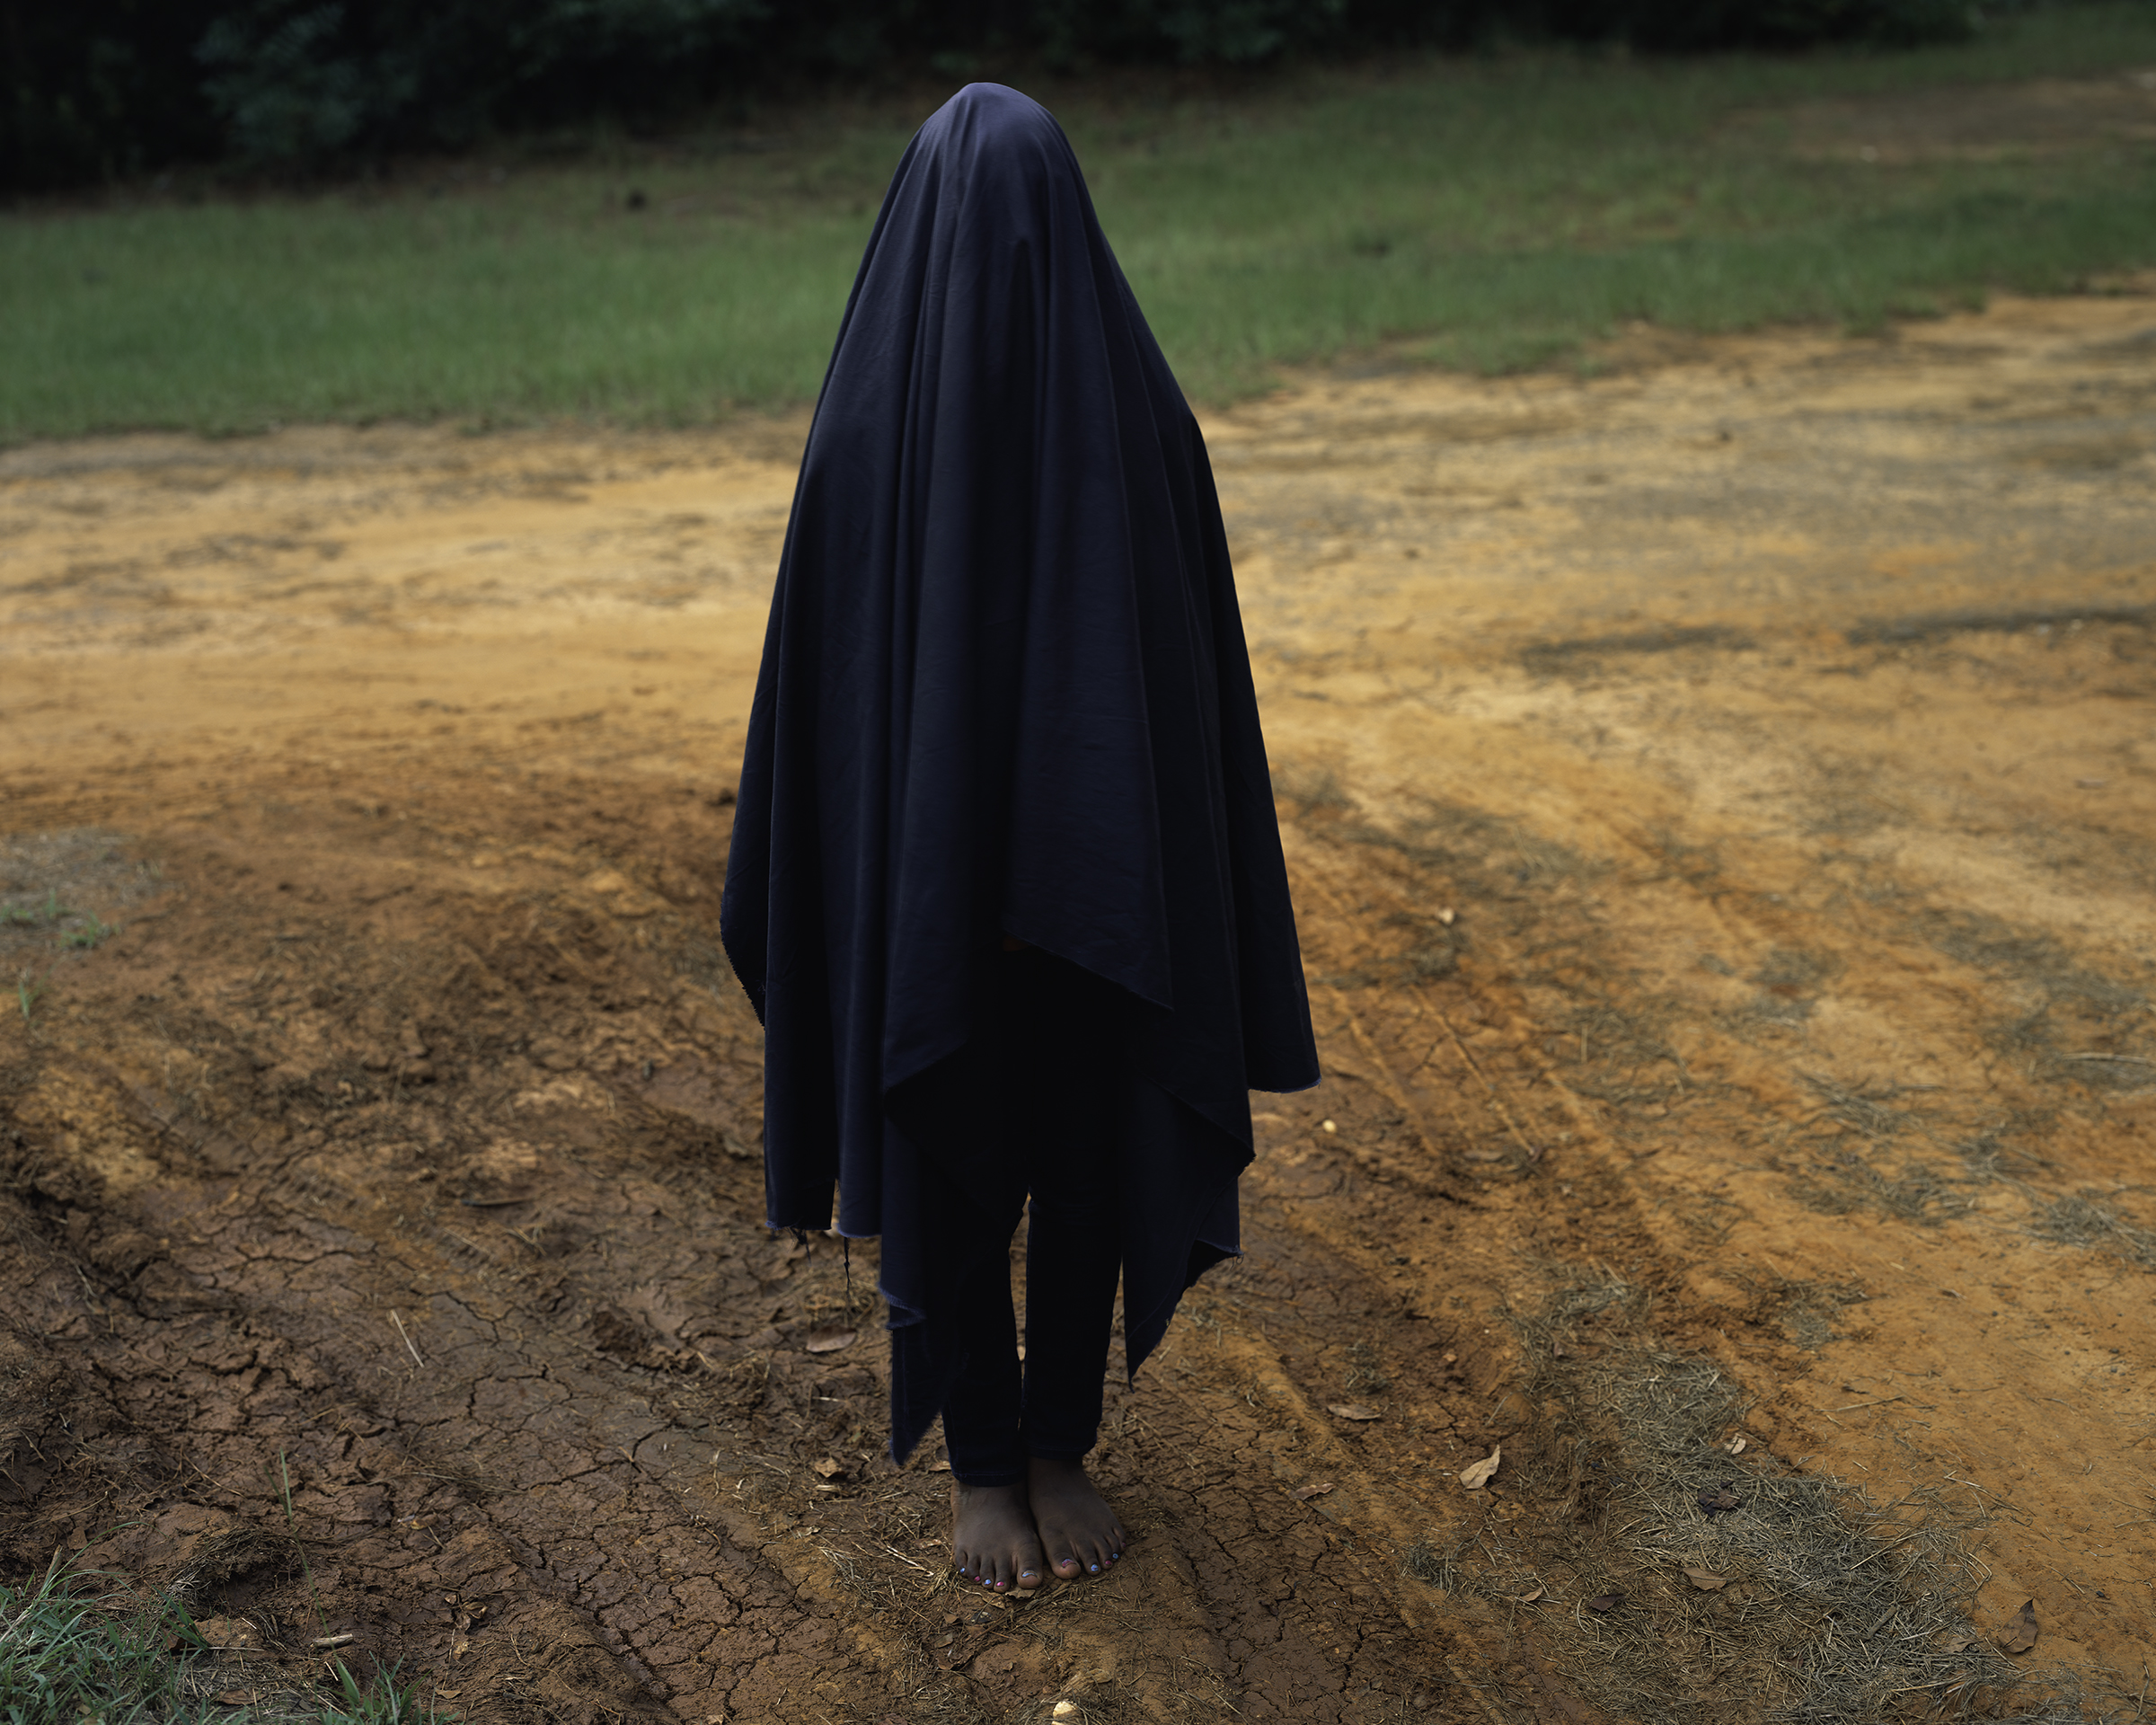 A person standing covered in all black barefoot on dirt with grass in the back